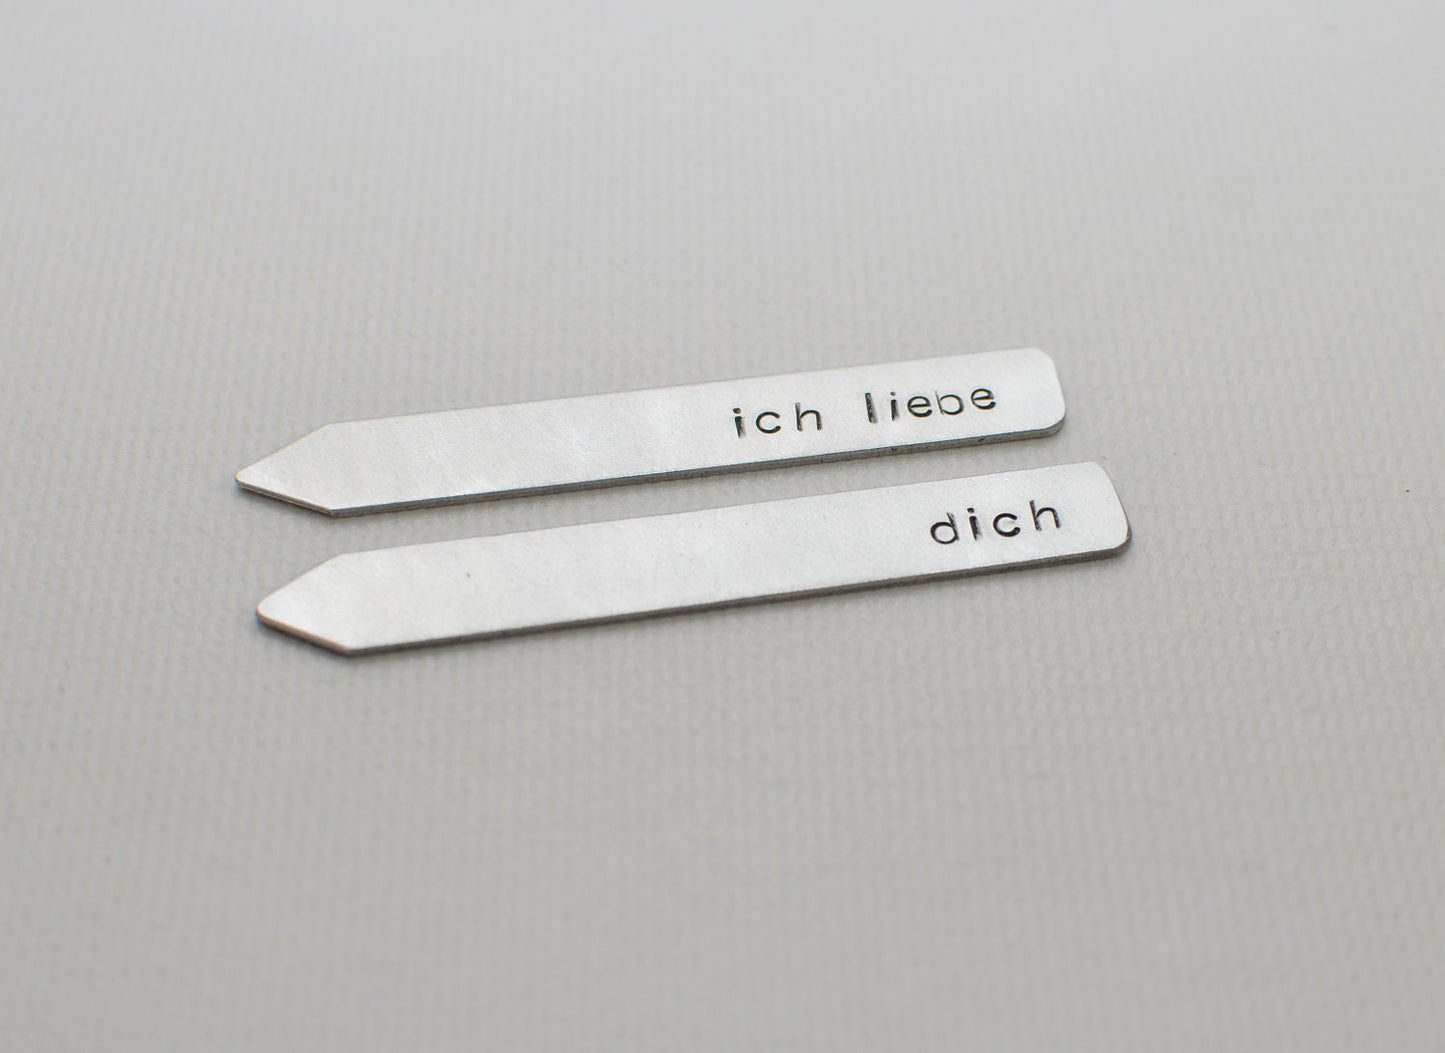 Ich liebe dich sterling silver collar stays with I love you in German